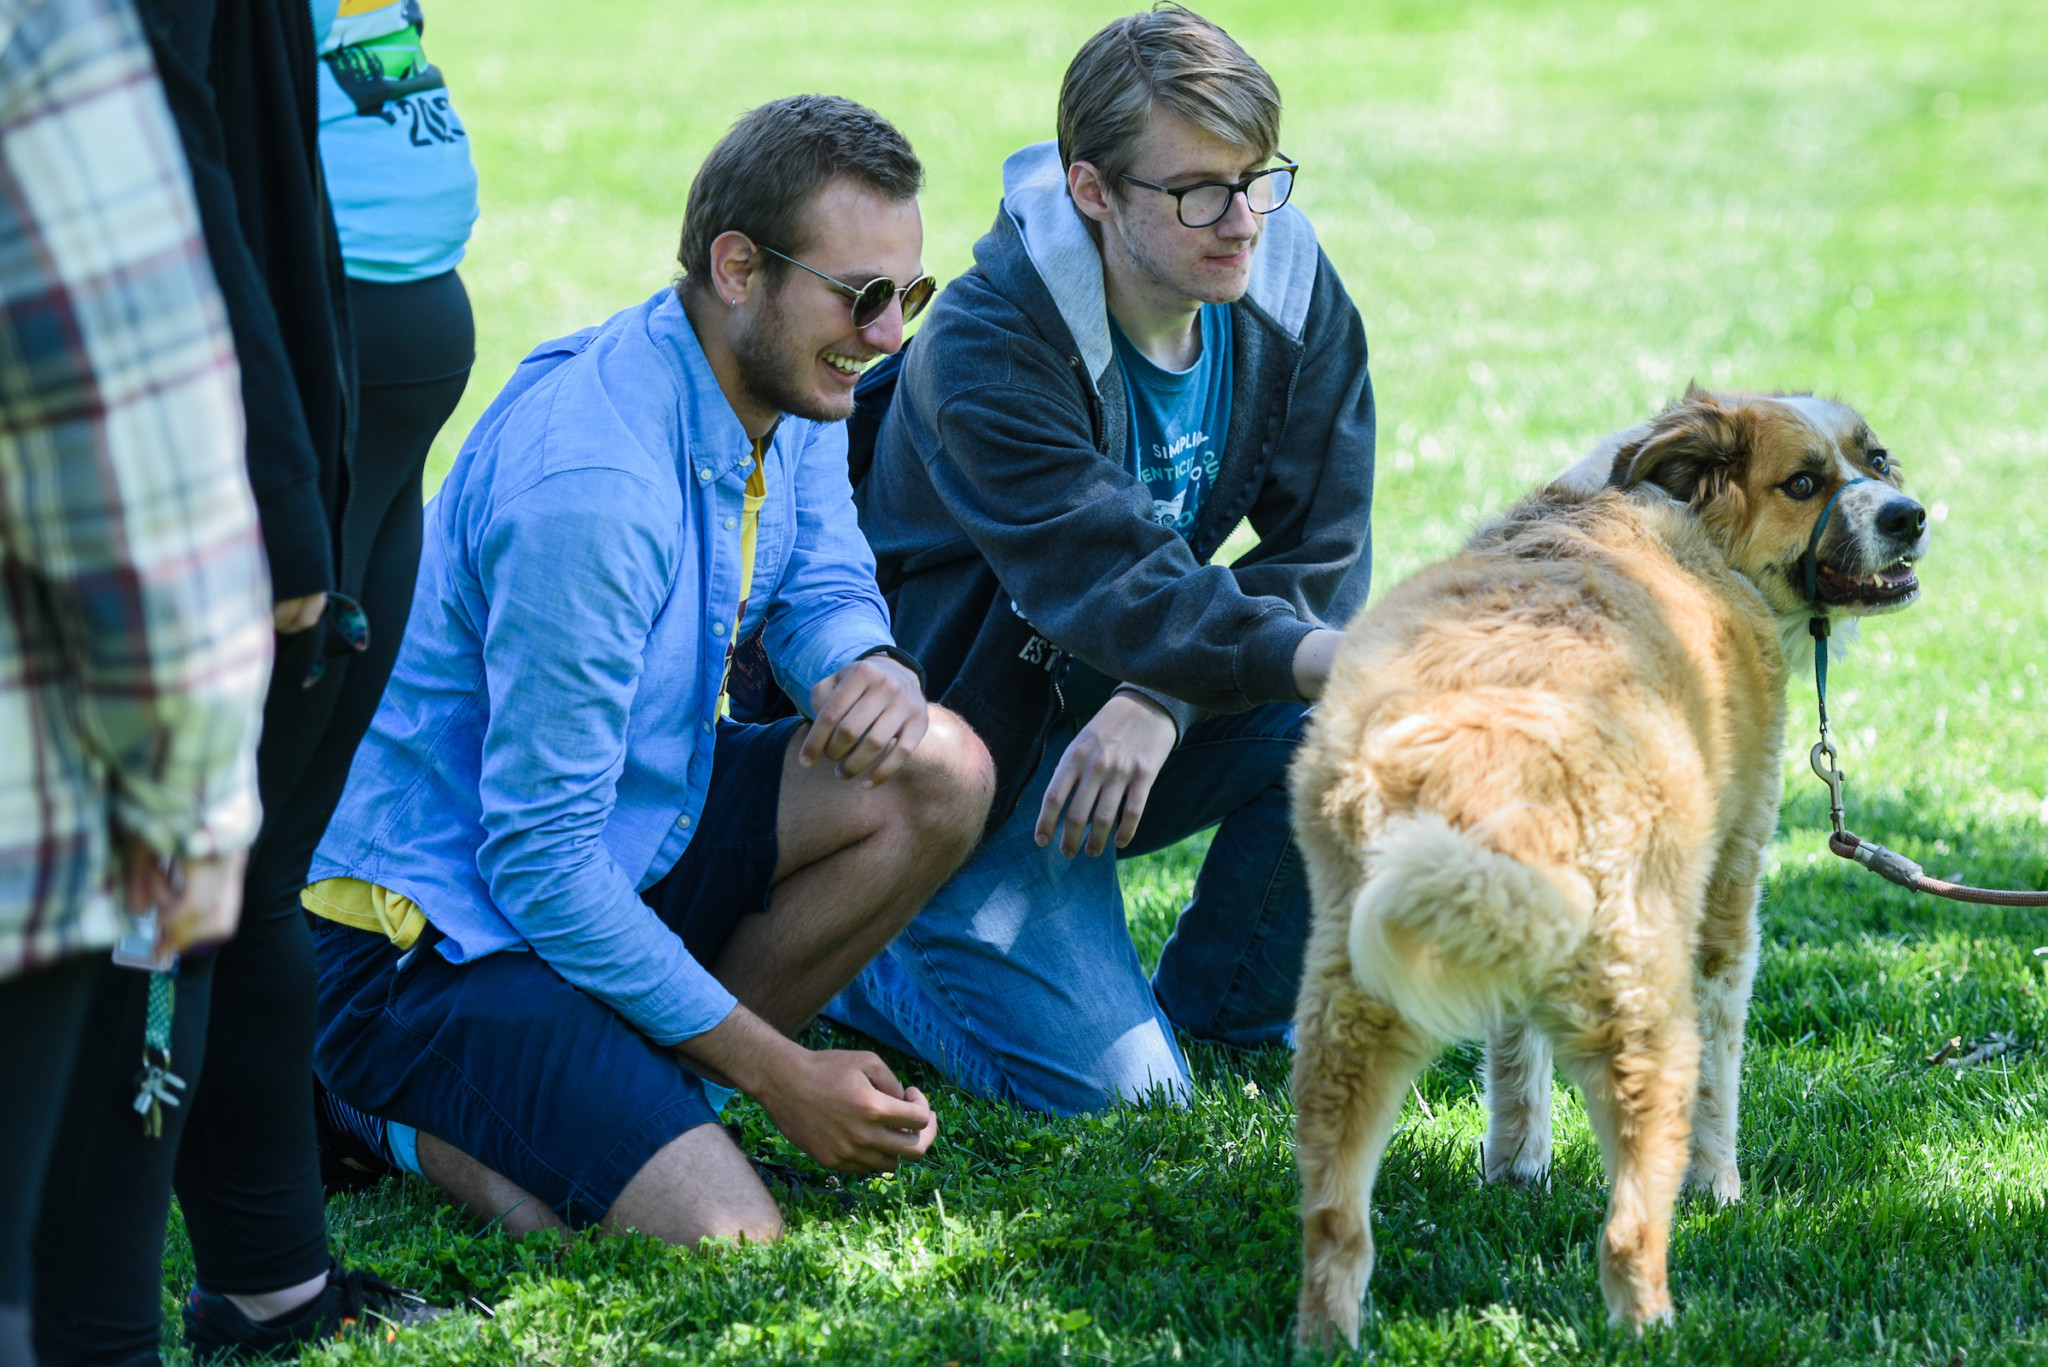 Two students petting a dog